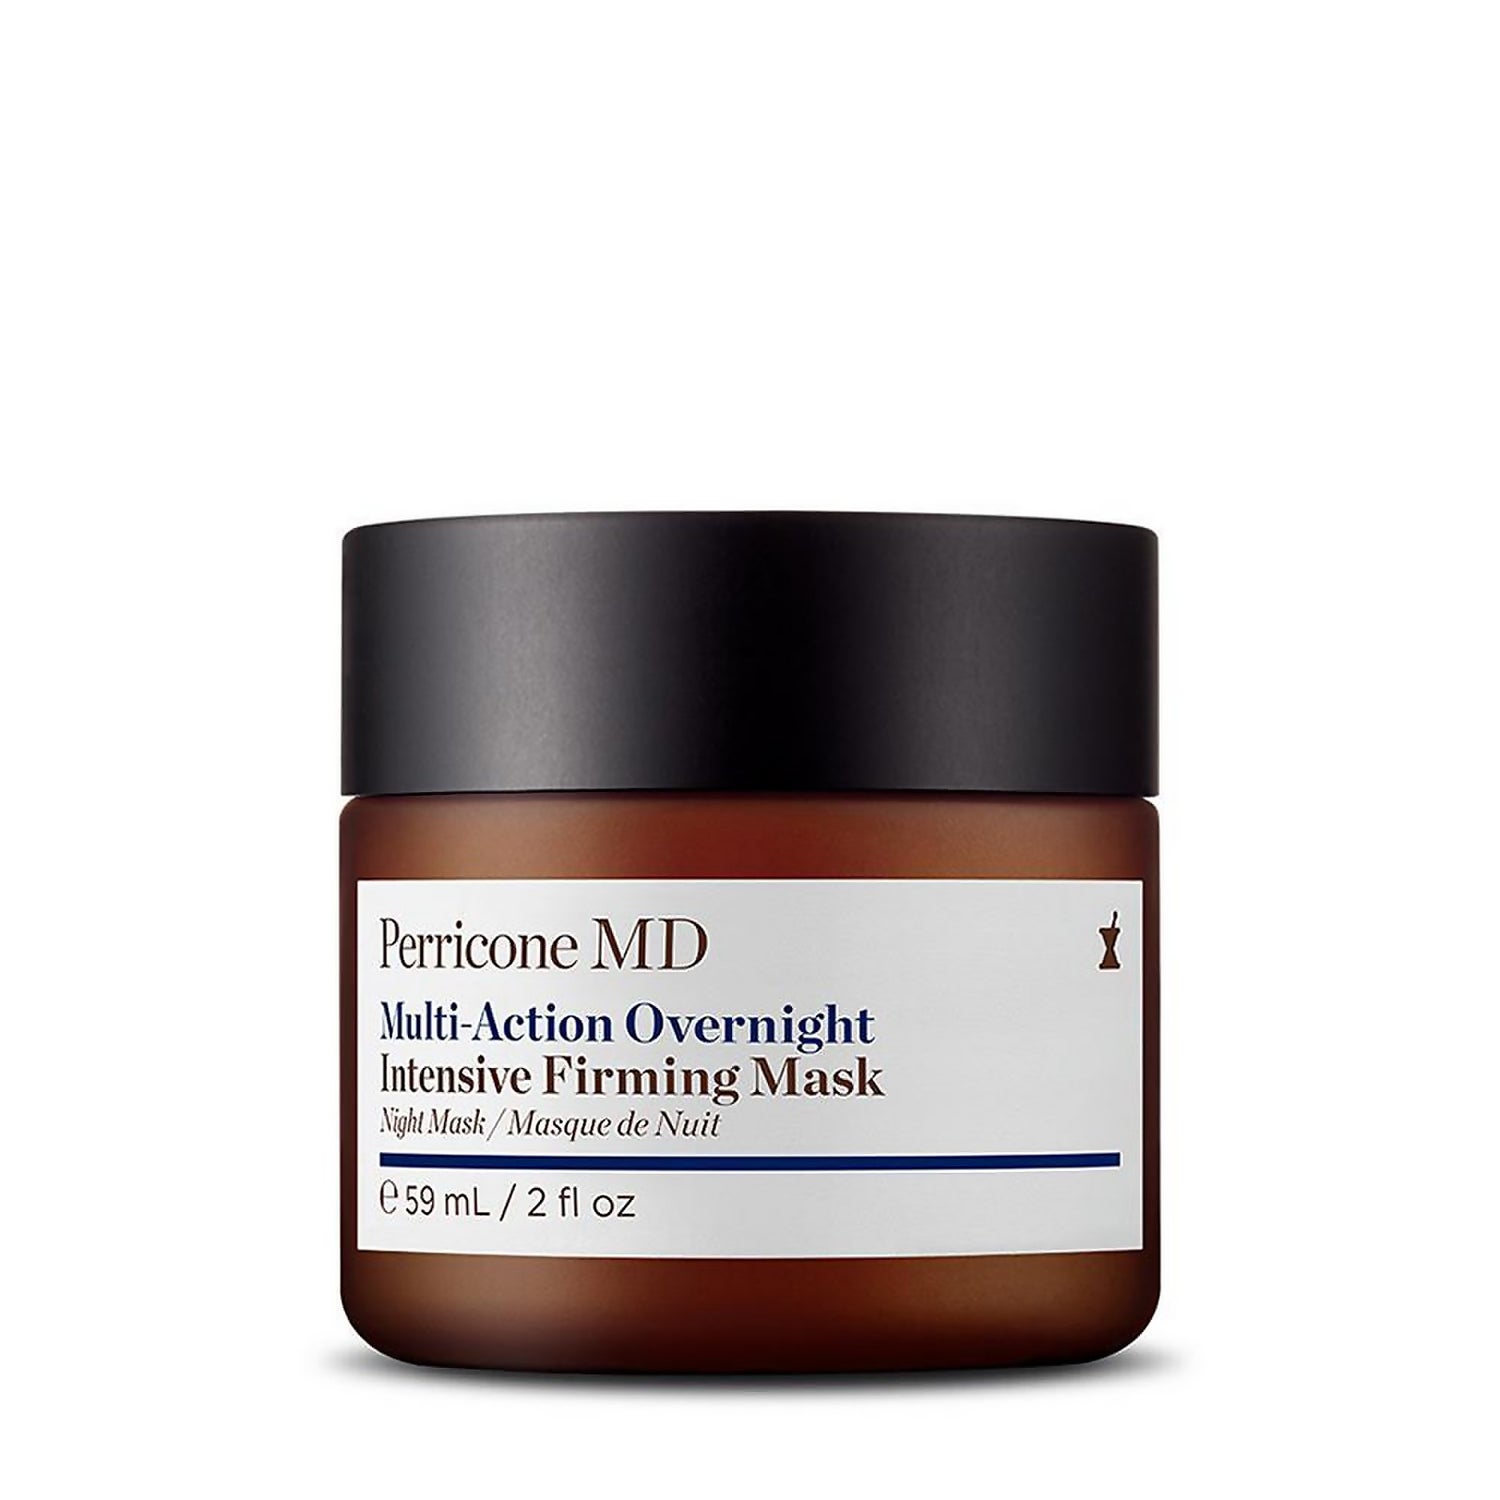 Perricone MD Multi-Action Overnight Intensive Firming Mask (2 fl. oz.)